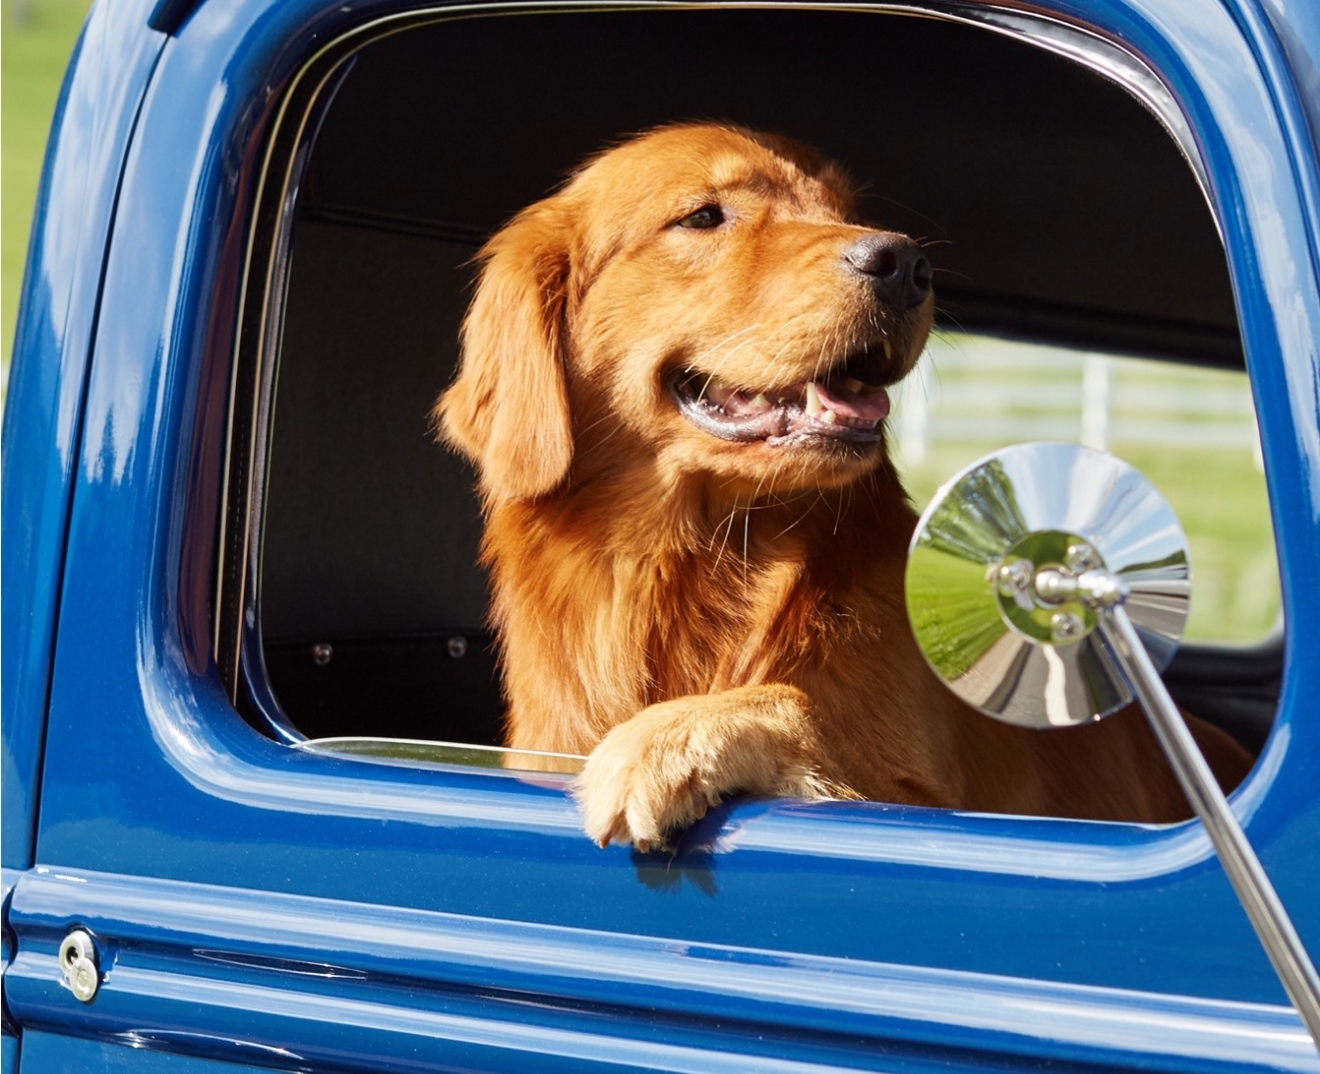 Golden retriever sticking it's head out the window of a blue truck.